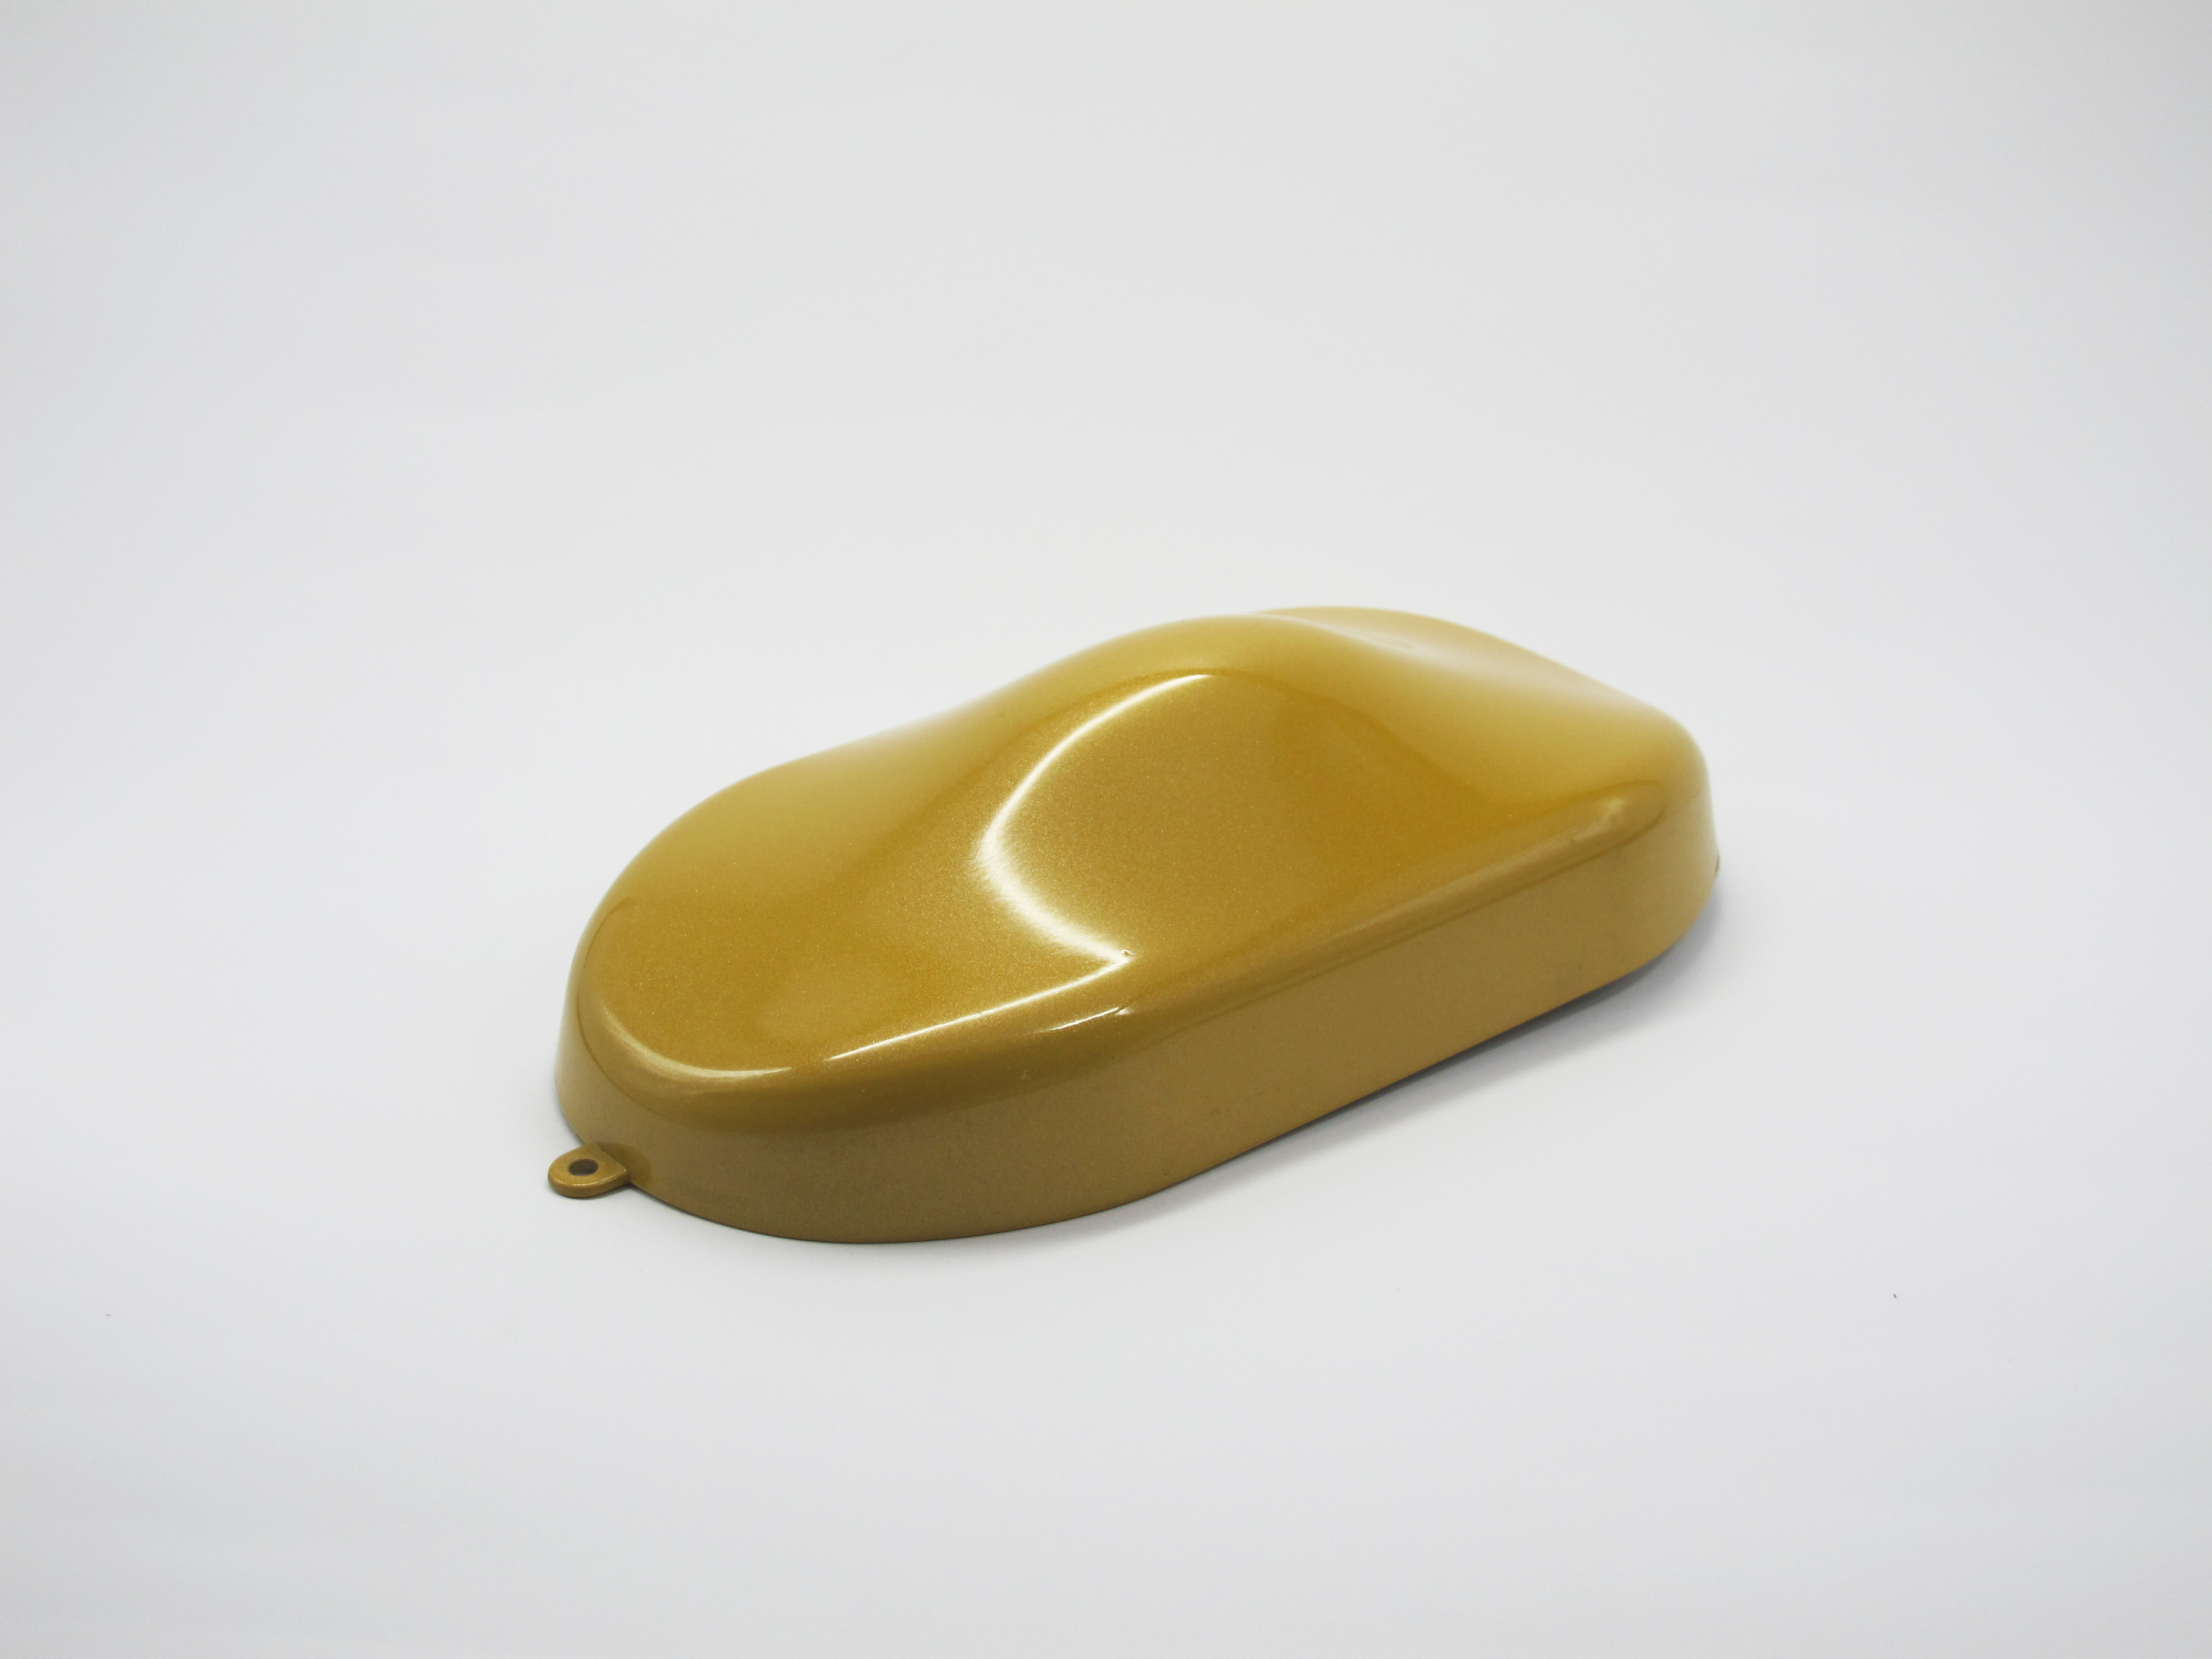 A 339 Mapico Yellow Solid Color with 50 Percent Metallic Coarse